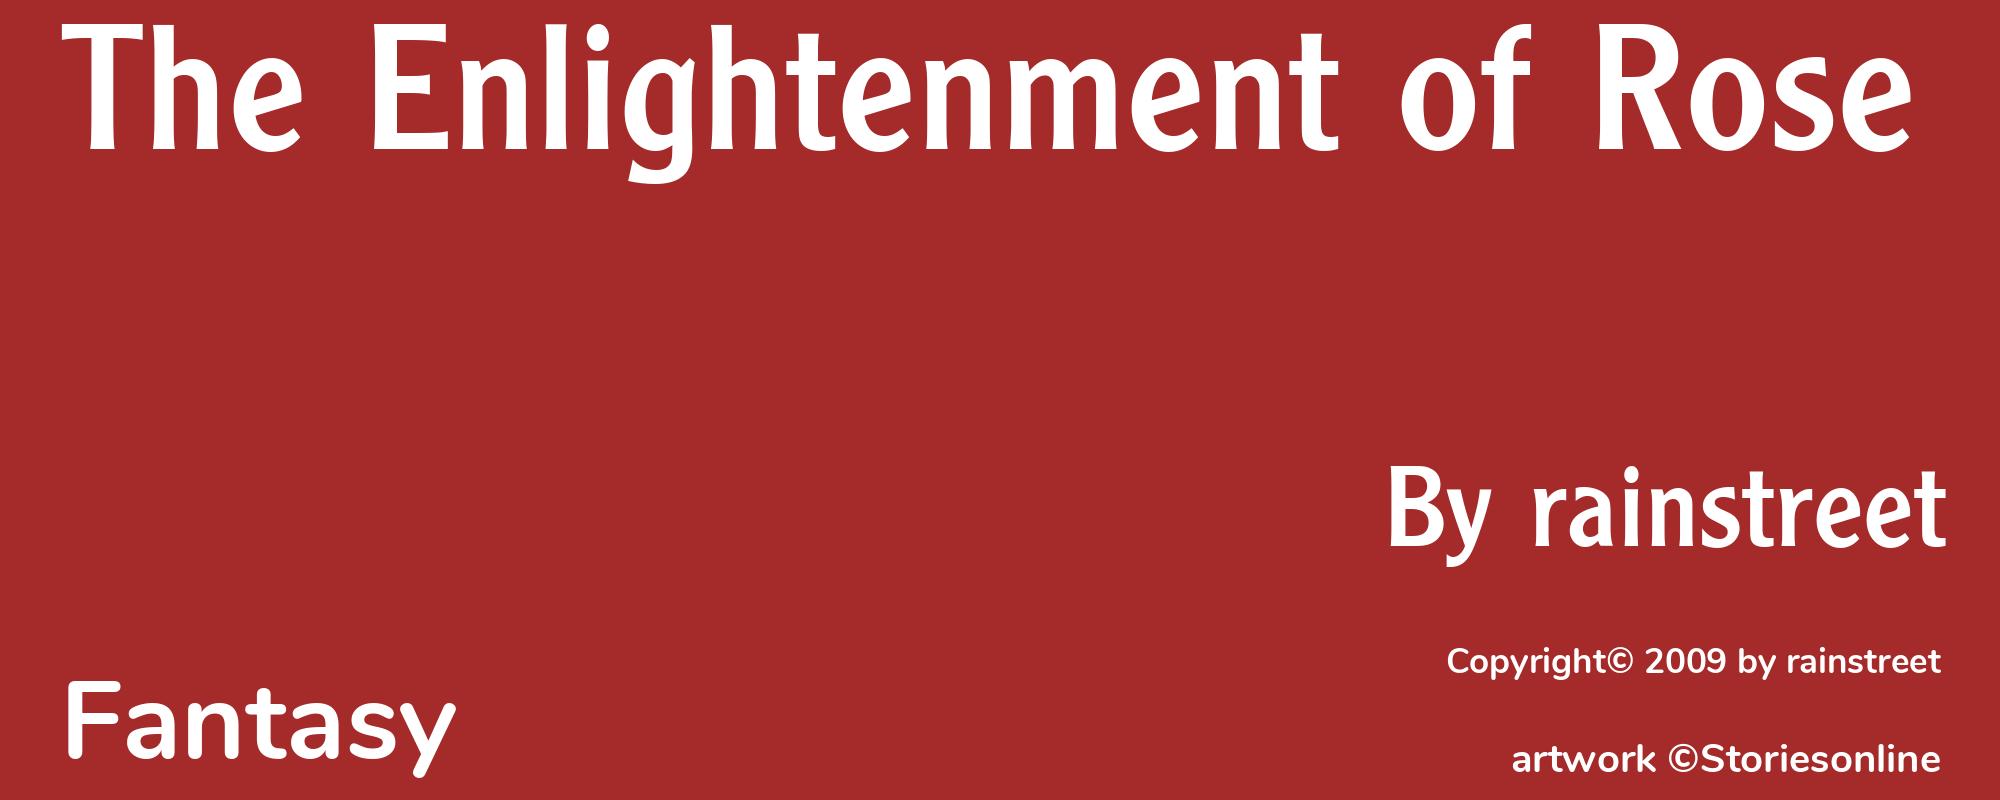 The Enlightenment of Rose - Cover